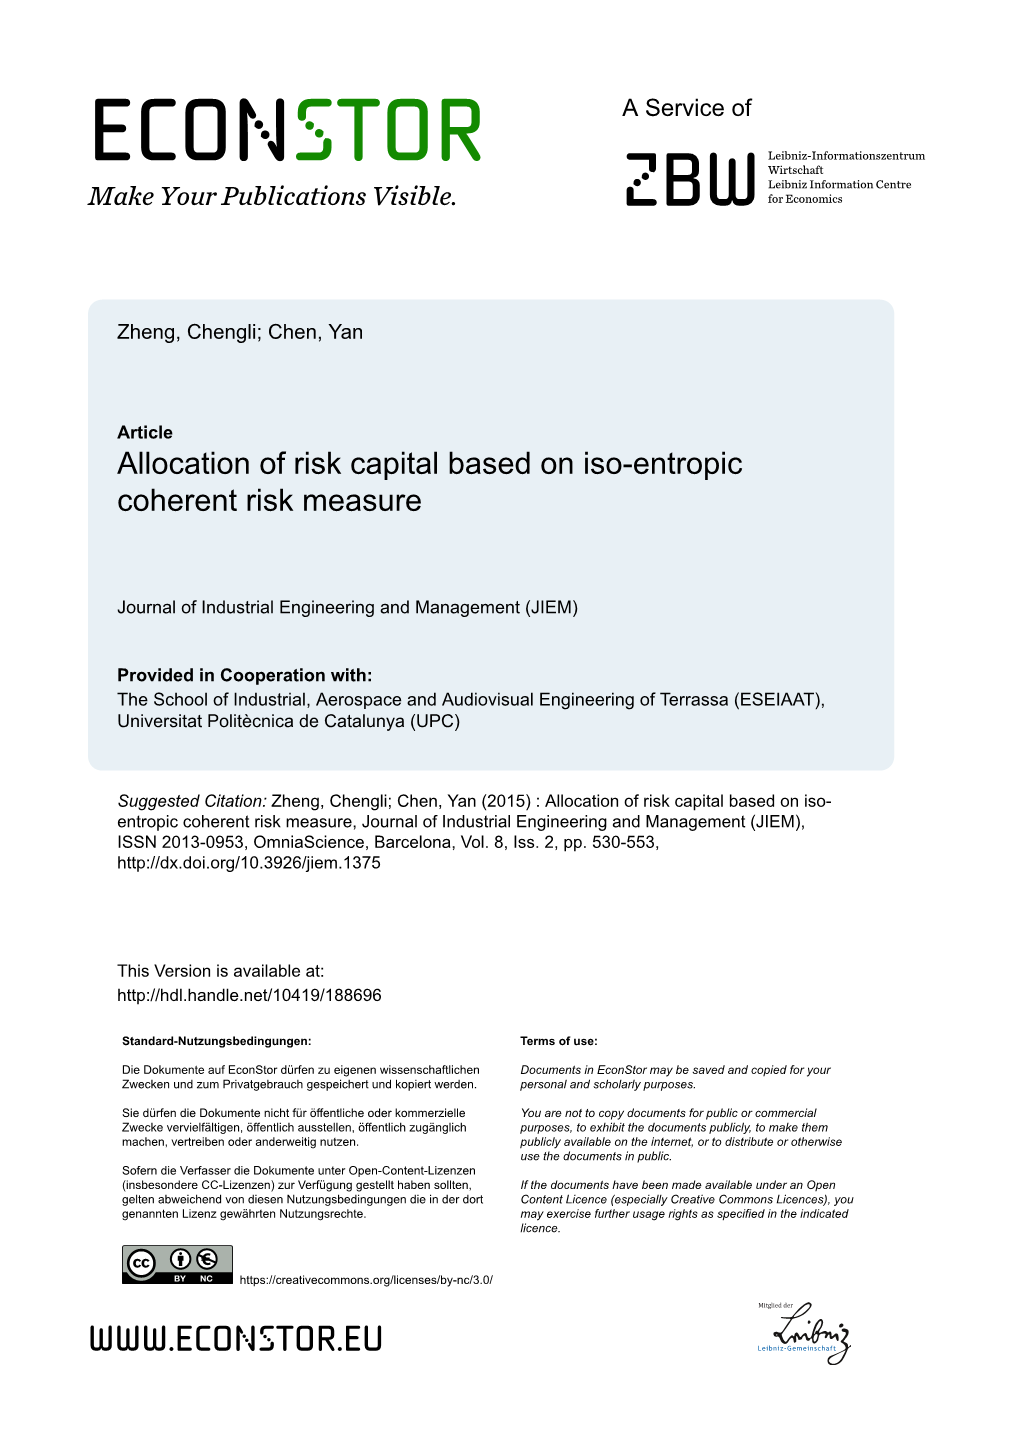 Allocation of Risk Capital Based on Iso-Entropic Coherent Risk Measure